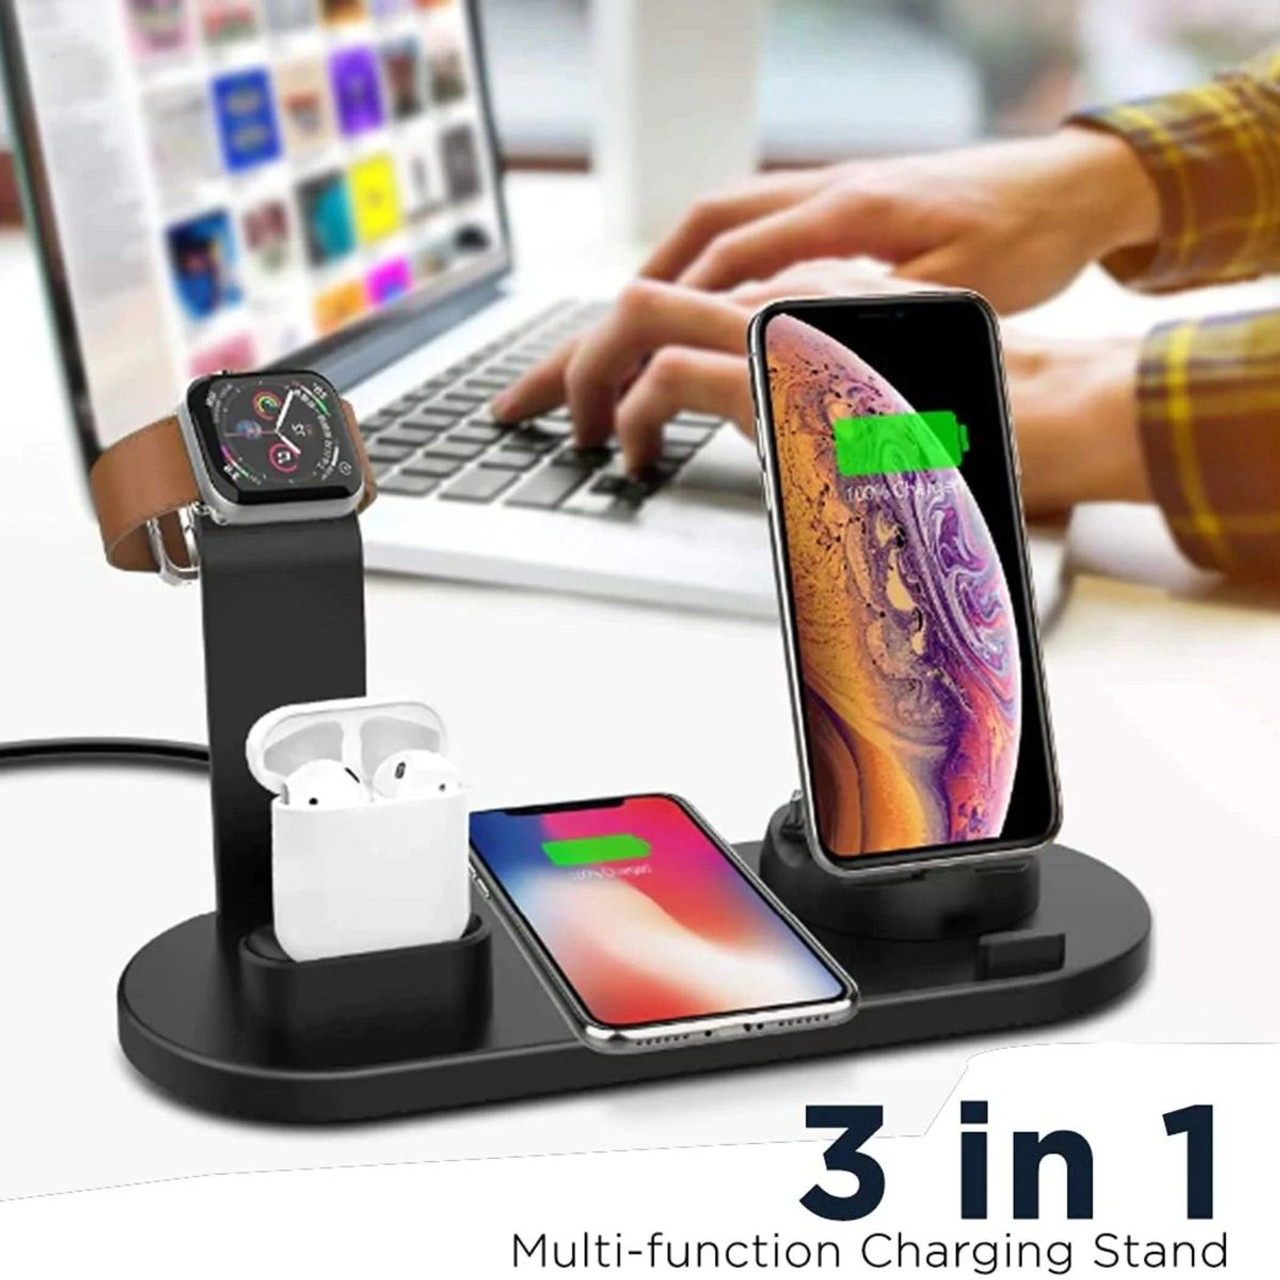 VYSN™ 6-in-1 Wireless Charging Station product image